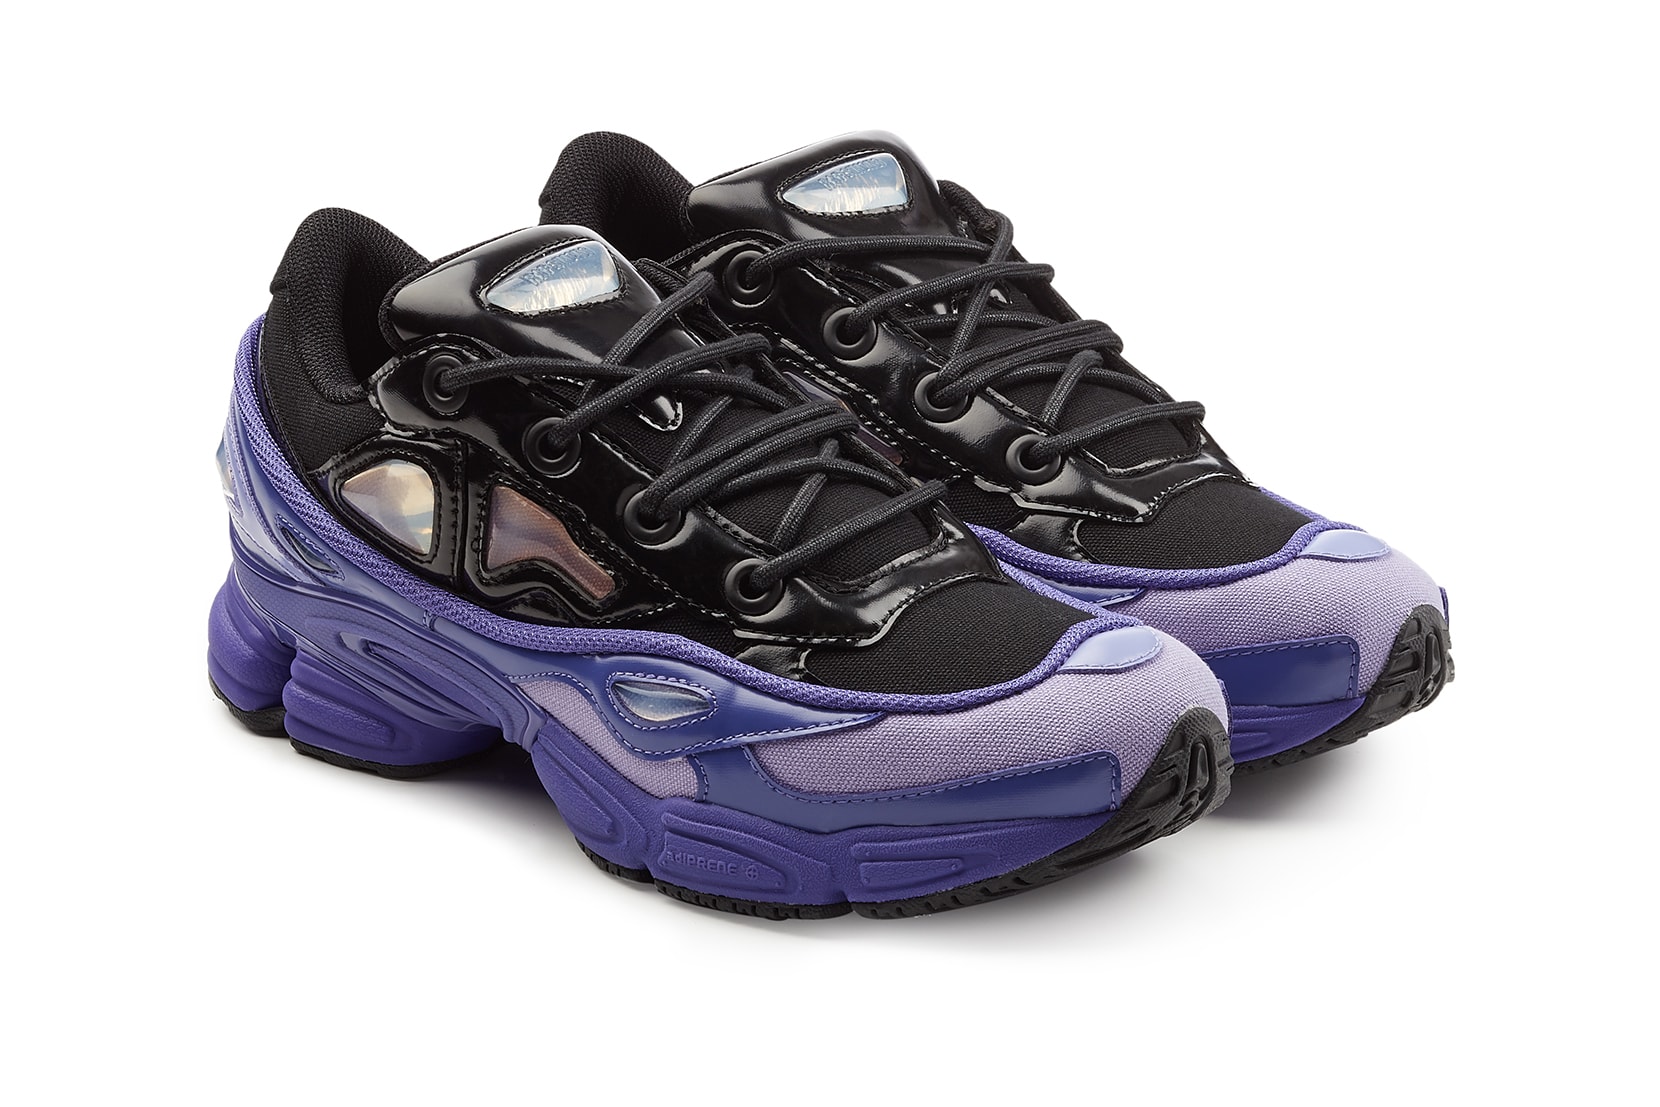 adidas by Raf Simons Ozweego III White Colorway Purple Colorway Red Colorway